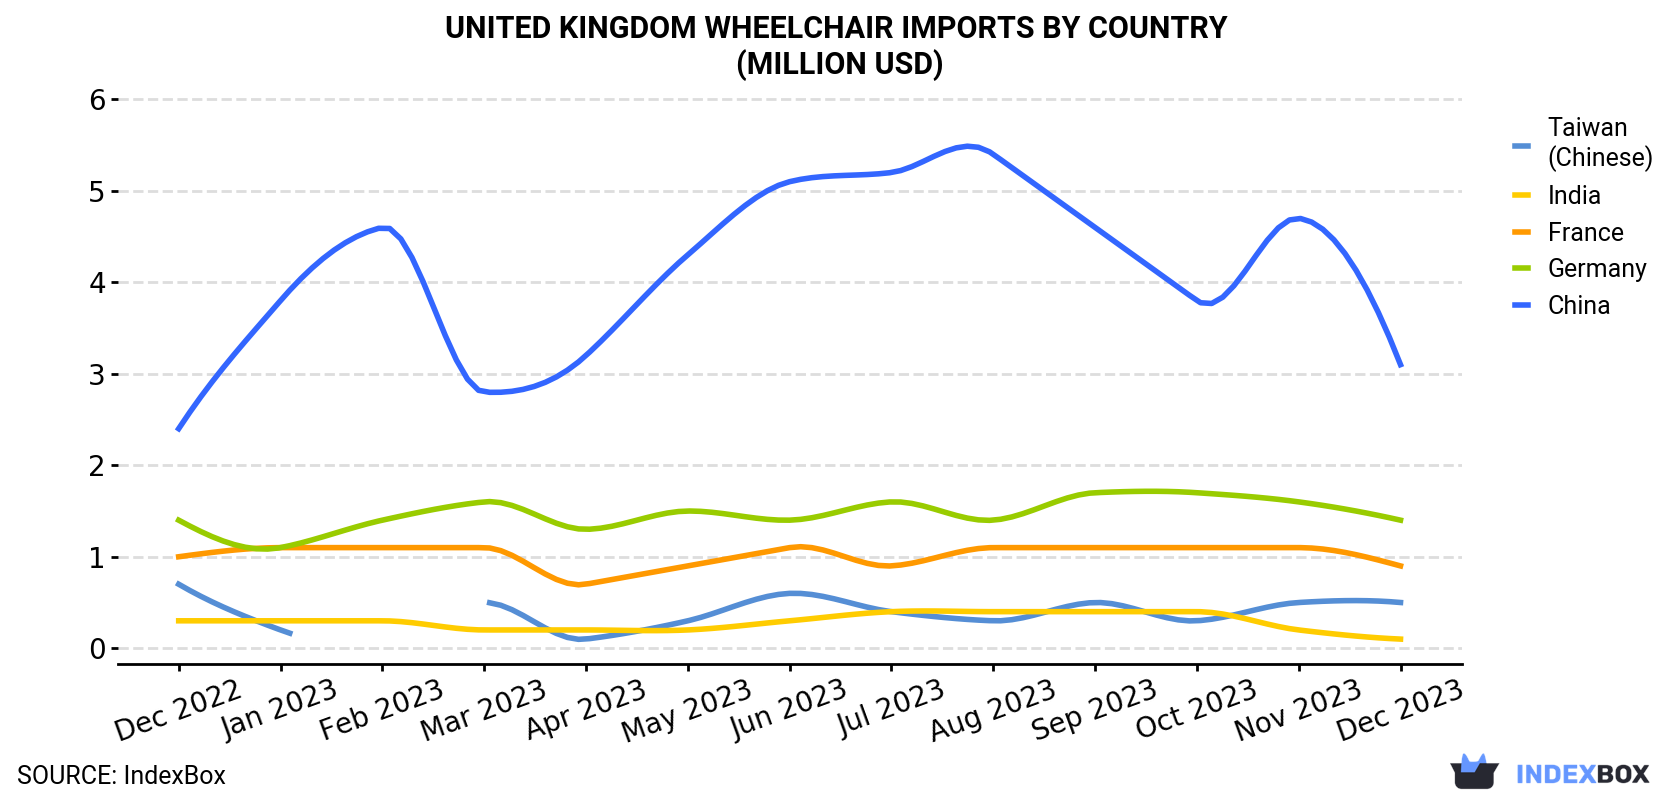 United Kingdom Wheelchair Imports By Country (Million USD)